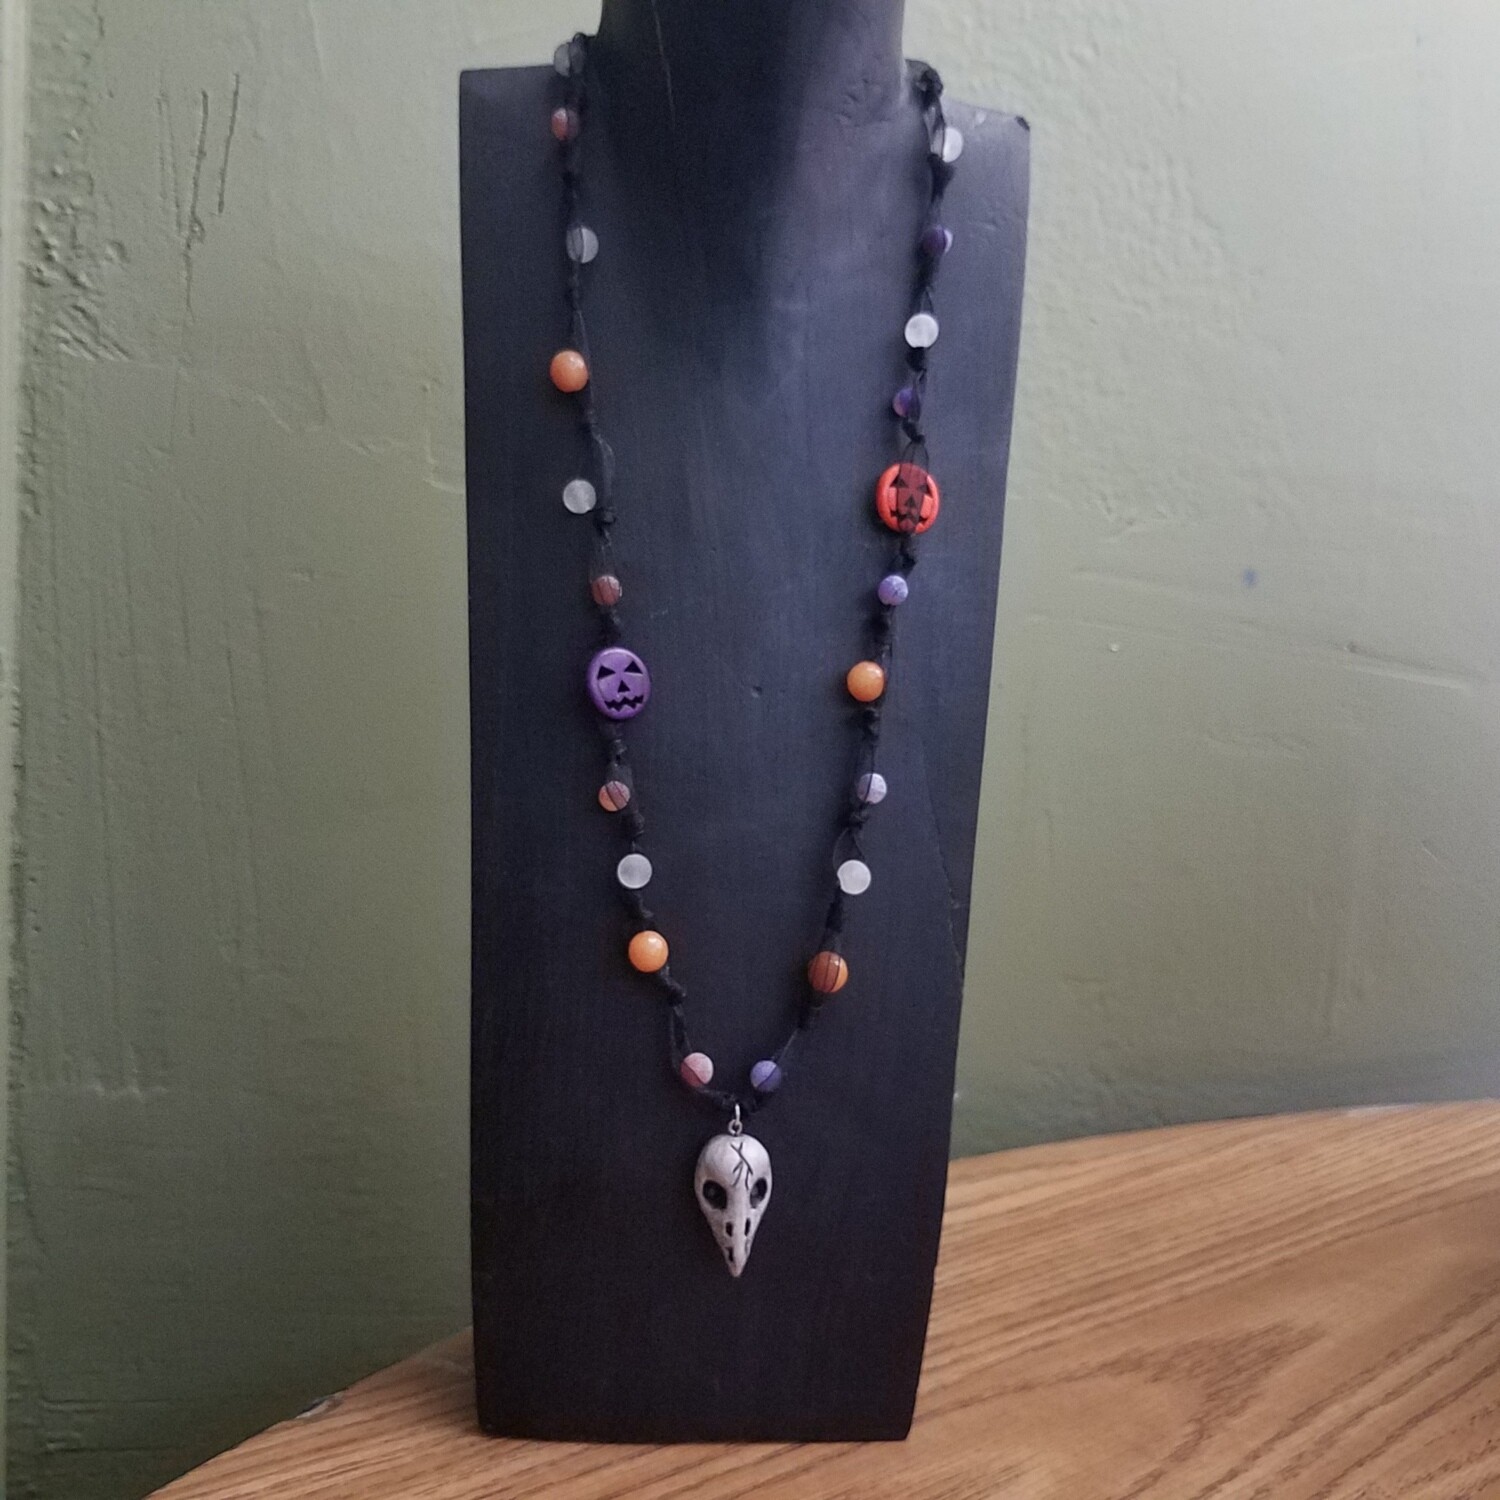 Beading Class-Raven & Lace-October 23rd 9am